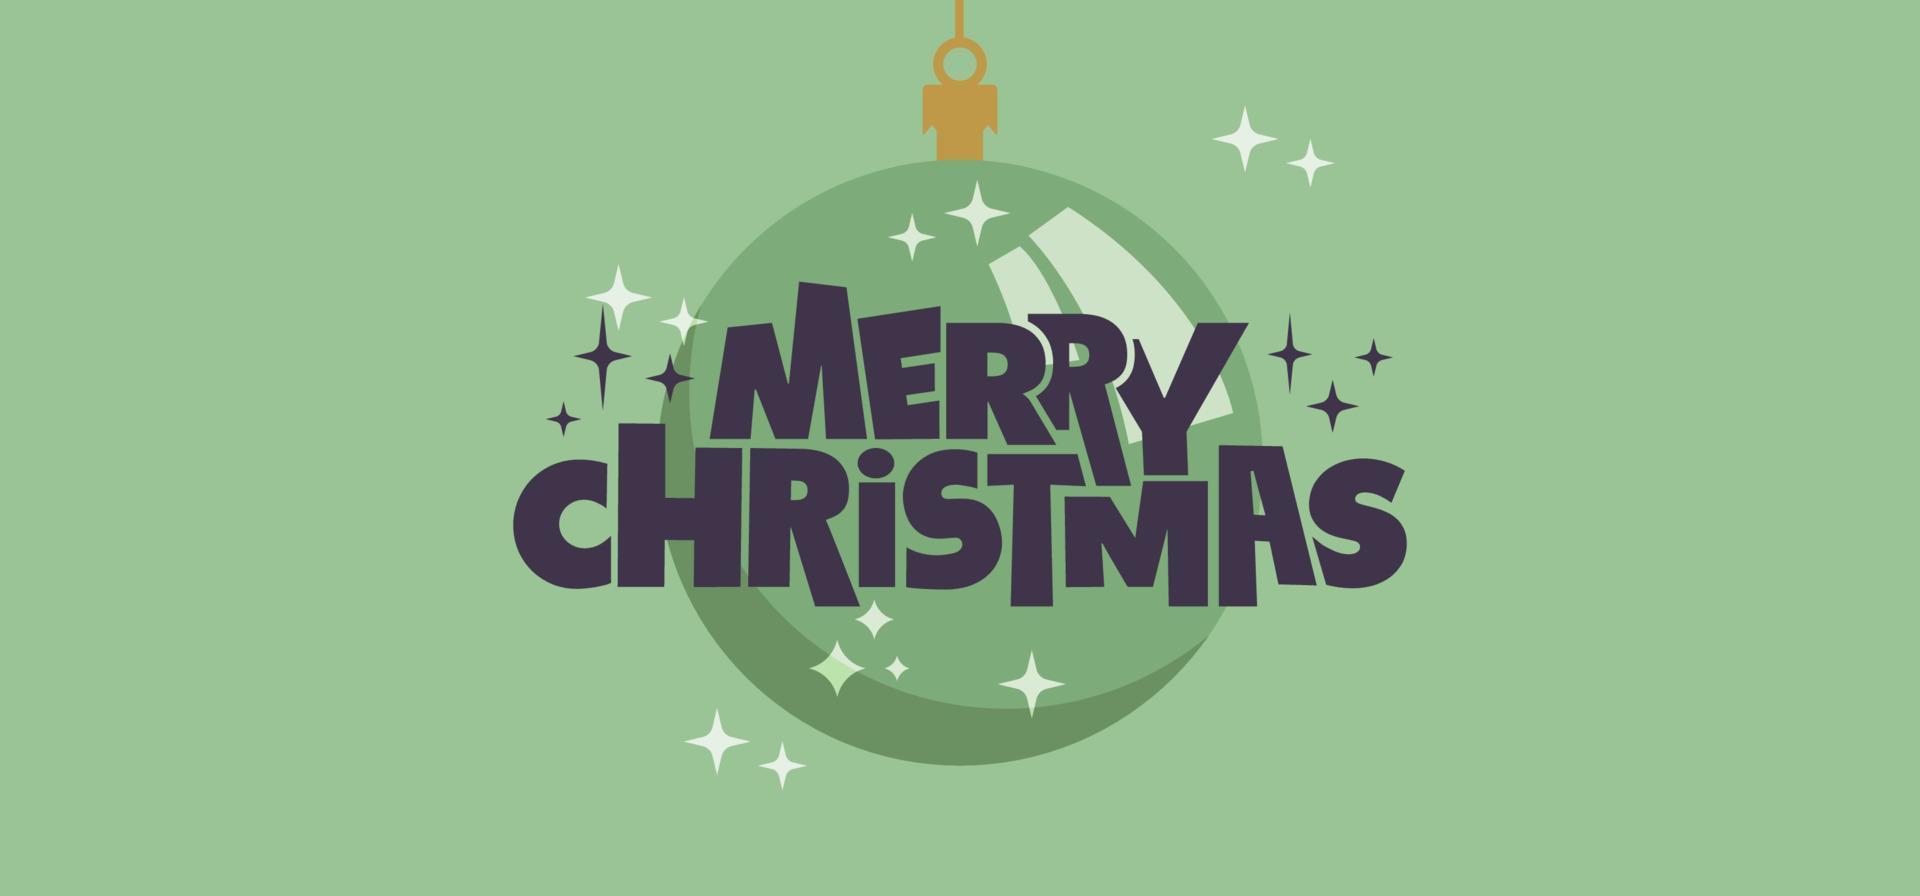 Merry Christmas horizontal banner. Flat design christmas ball. for greeting card or advertising in horizontal design with copy space. vector